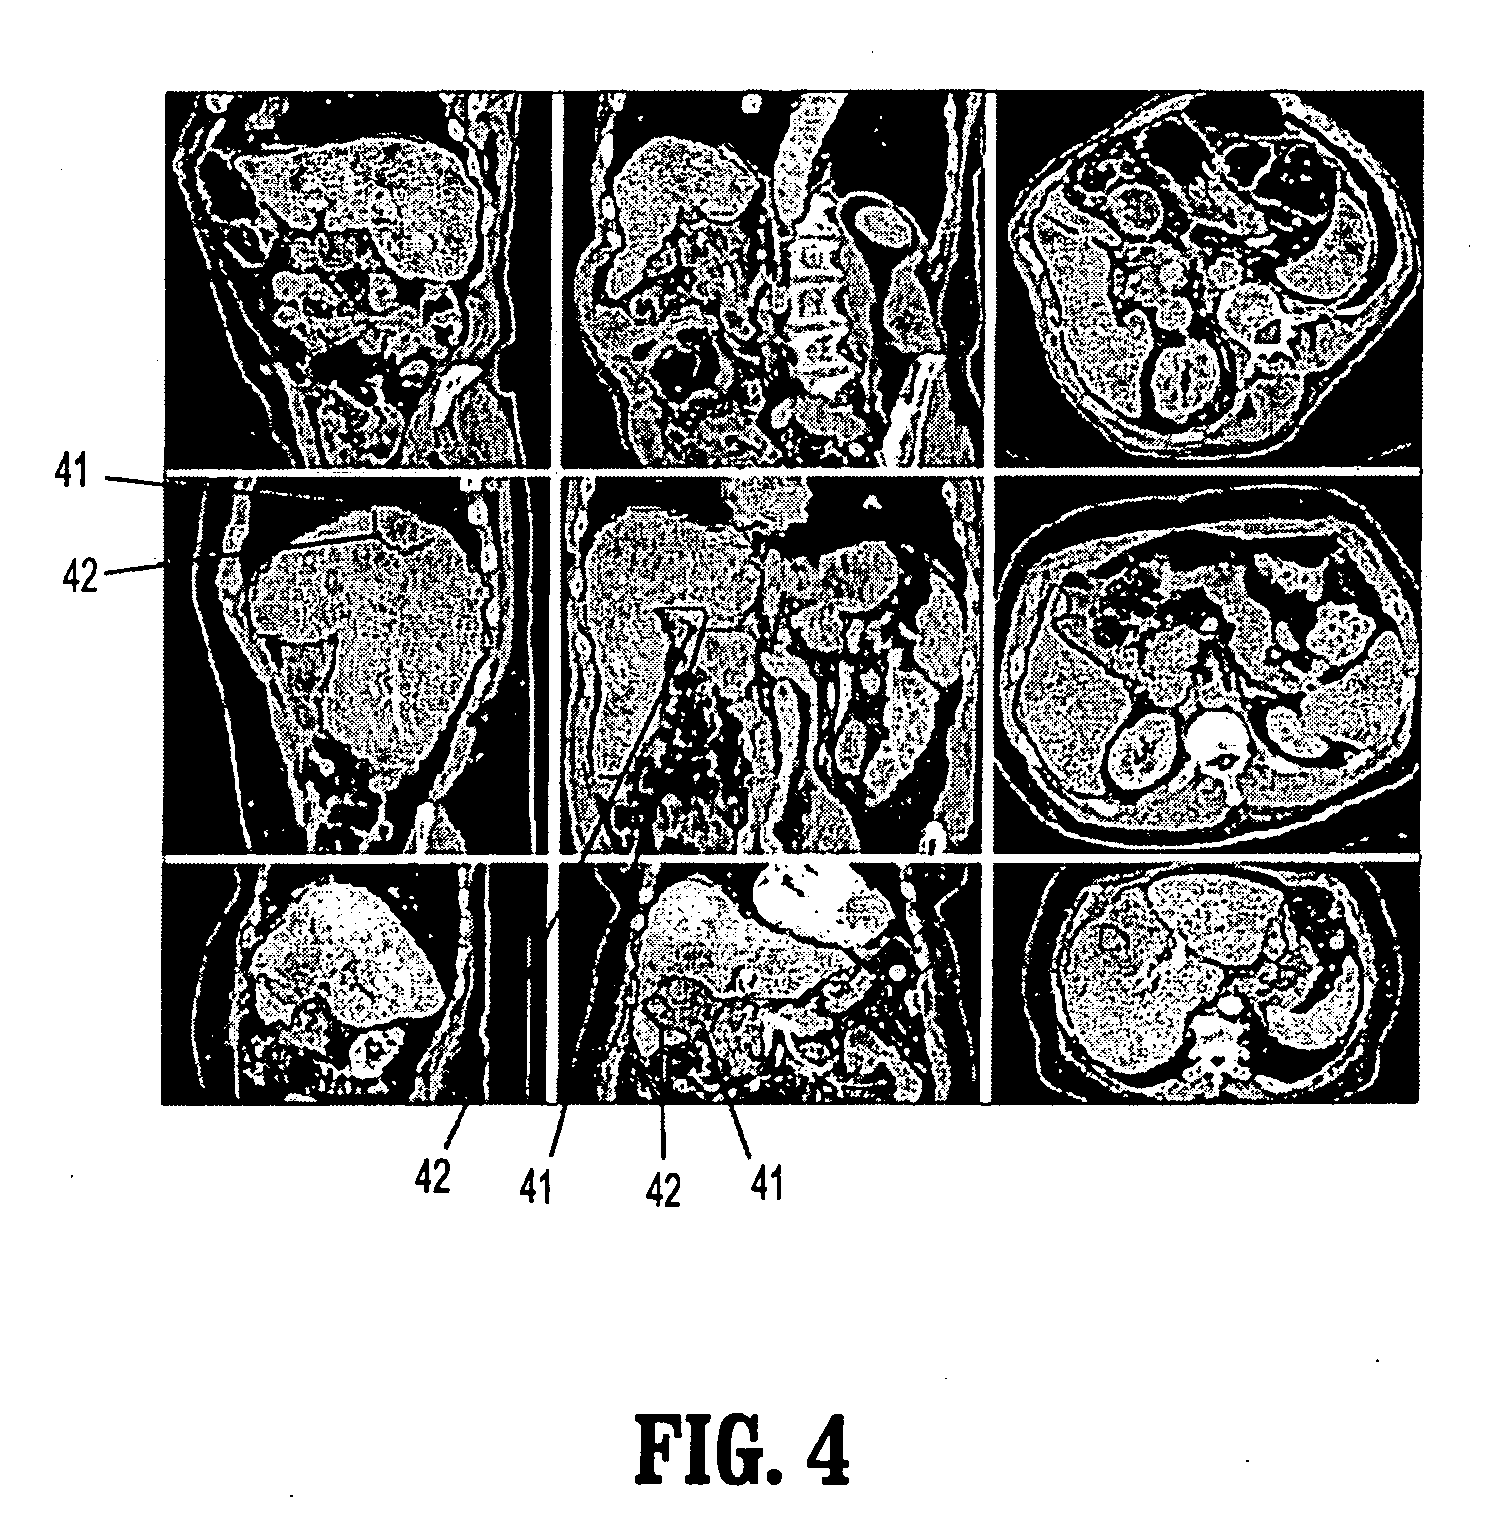 System and method for global-to-local shape matching for automatic liver segmentation in medical imaging